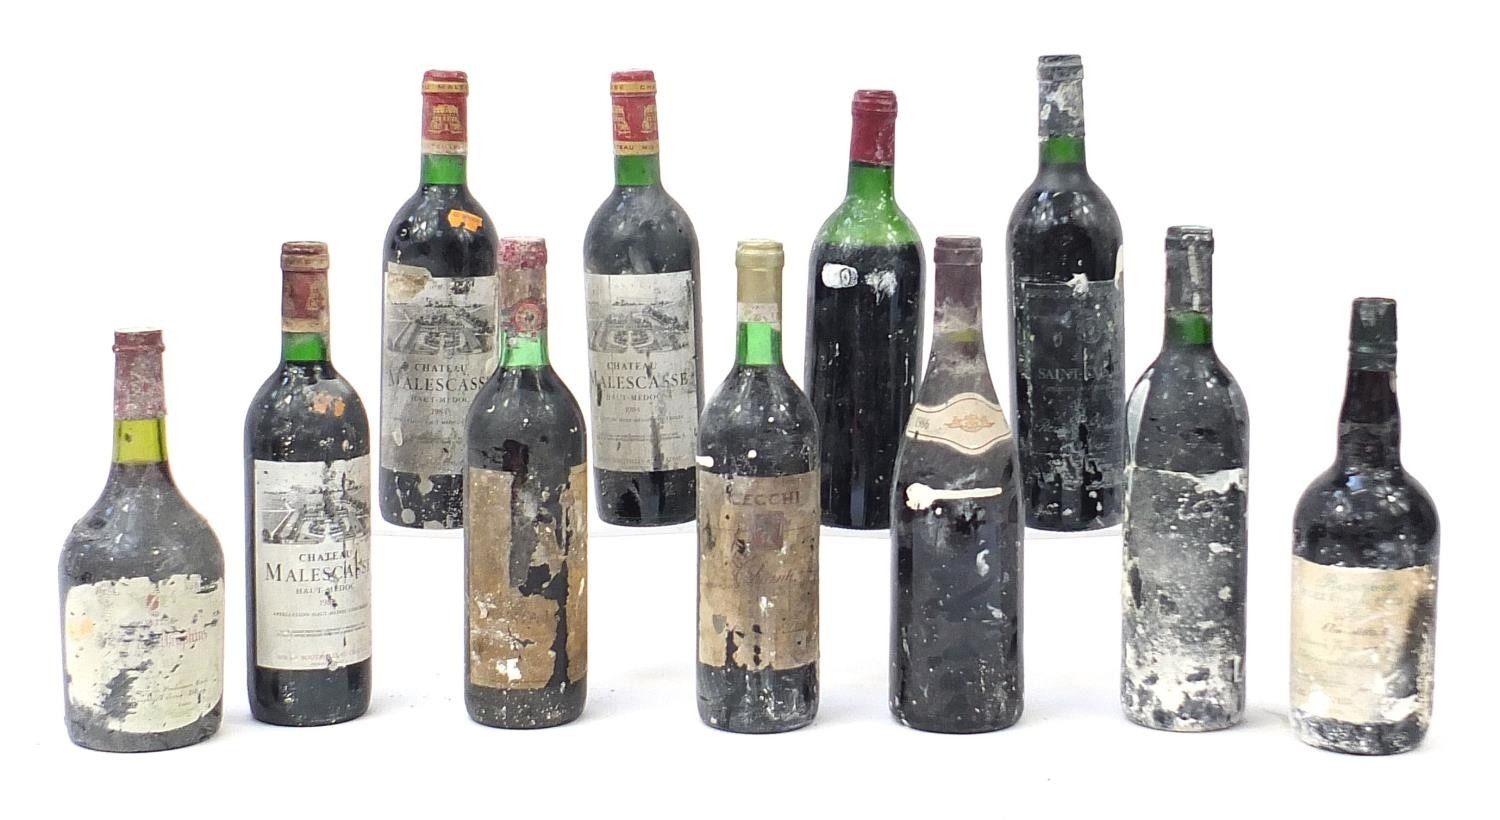 Eleven bottles of vintage wine and alcohol including Berisford Solera 1914 sherry, three bottles